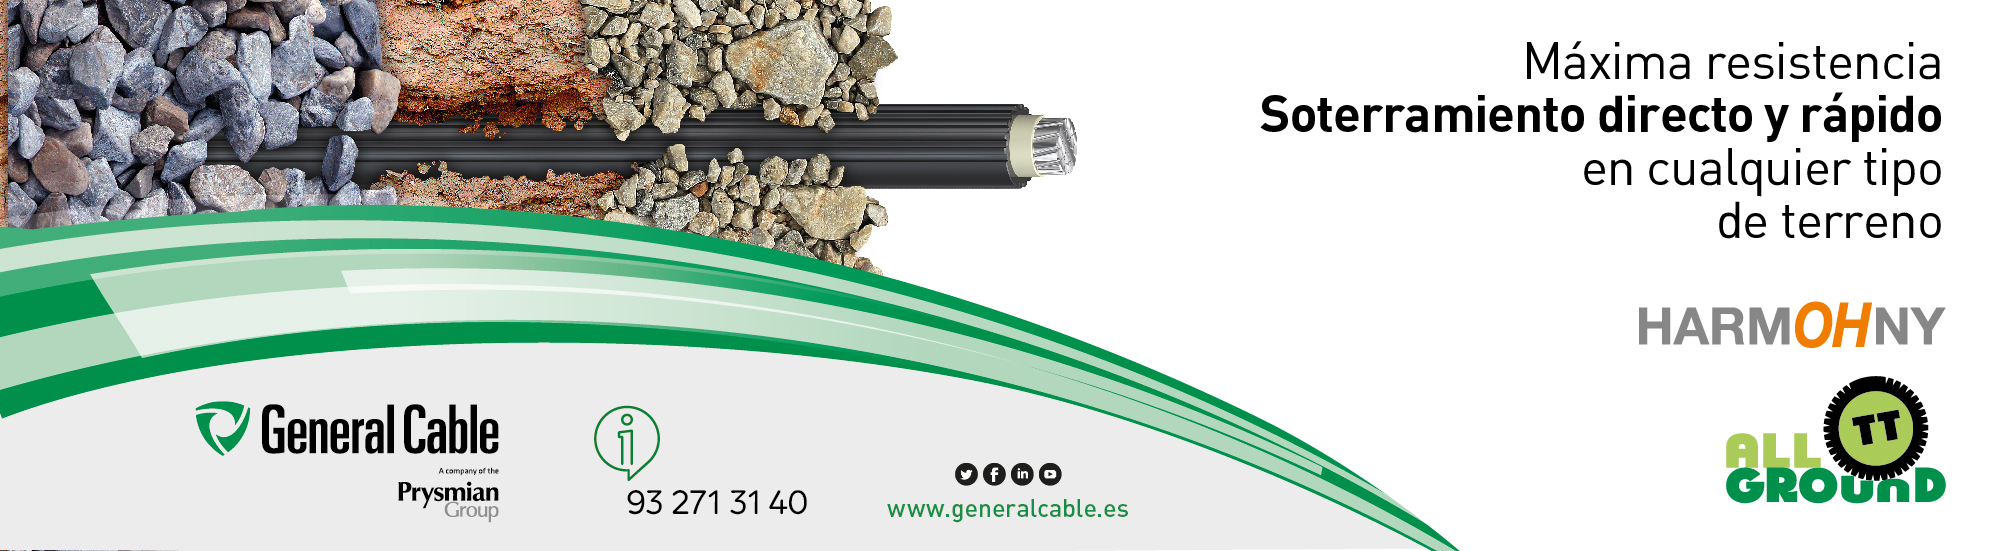 Banner General Cable Jul20